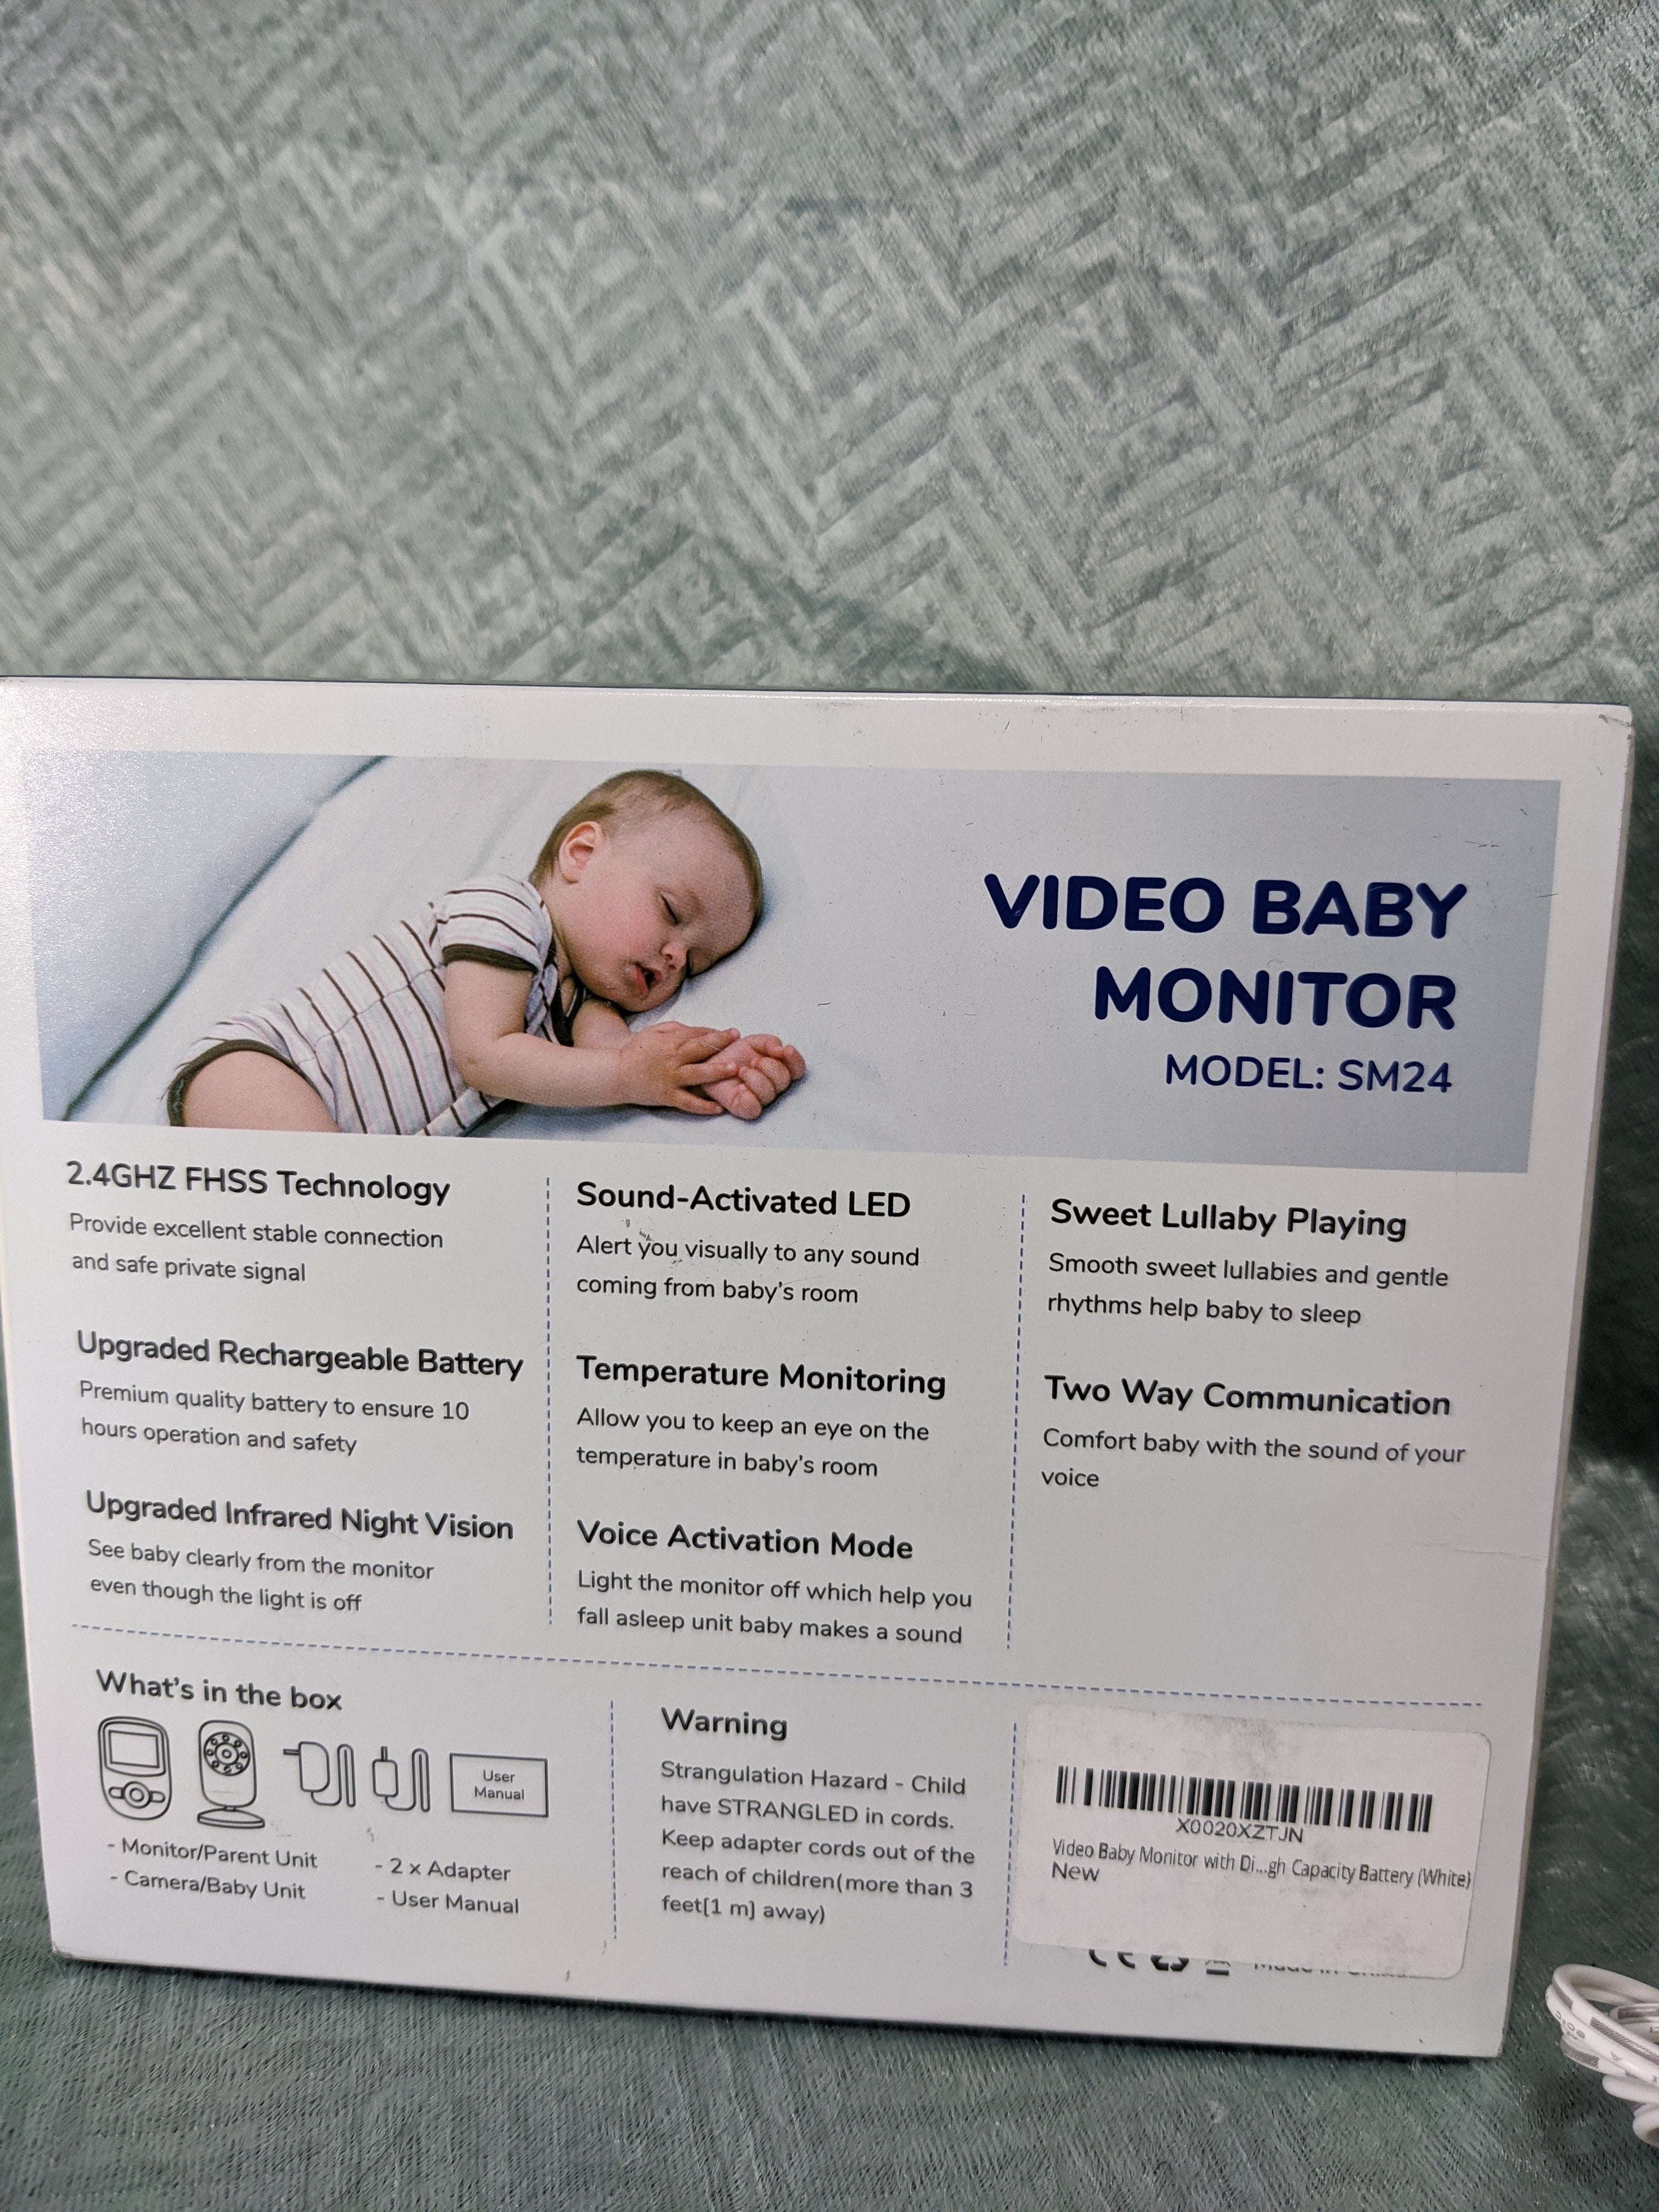 Video Baby Monitor with Digital Camera, ANMEATE Digital Wireless Video Monitor (7342589051118)